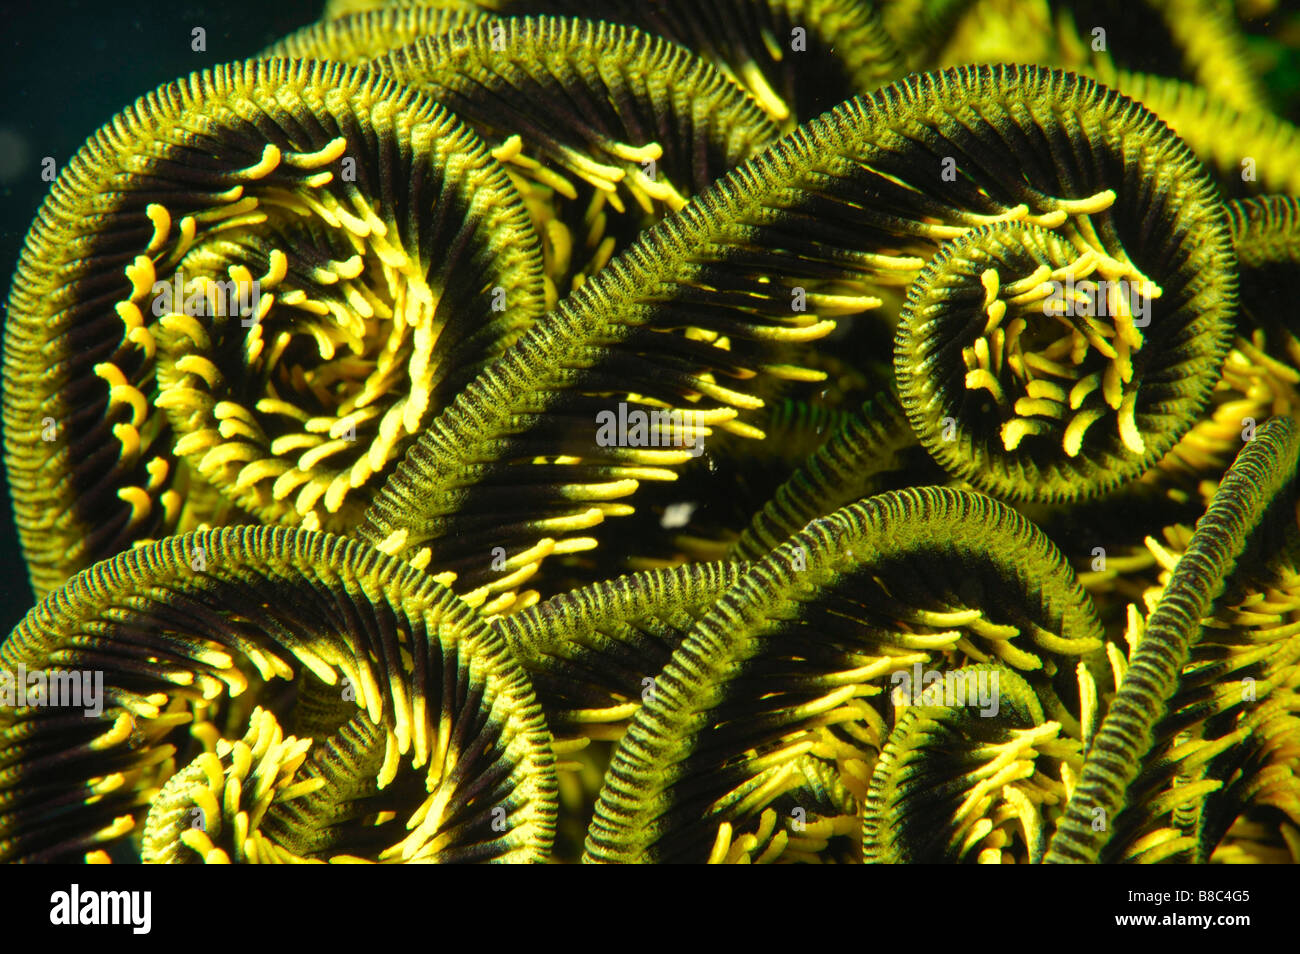 Feather star arms Stock Photo